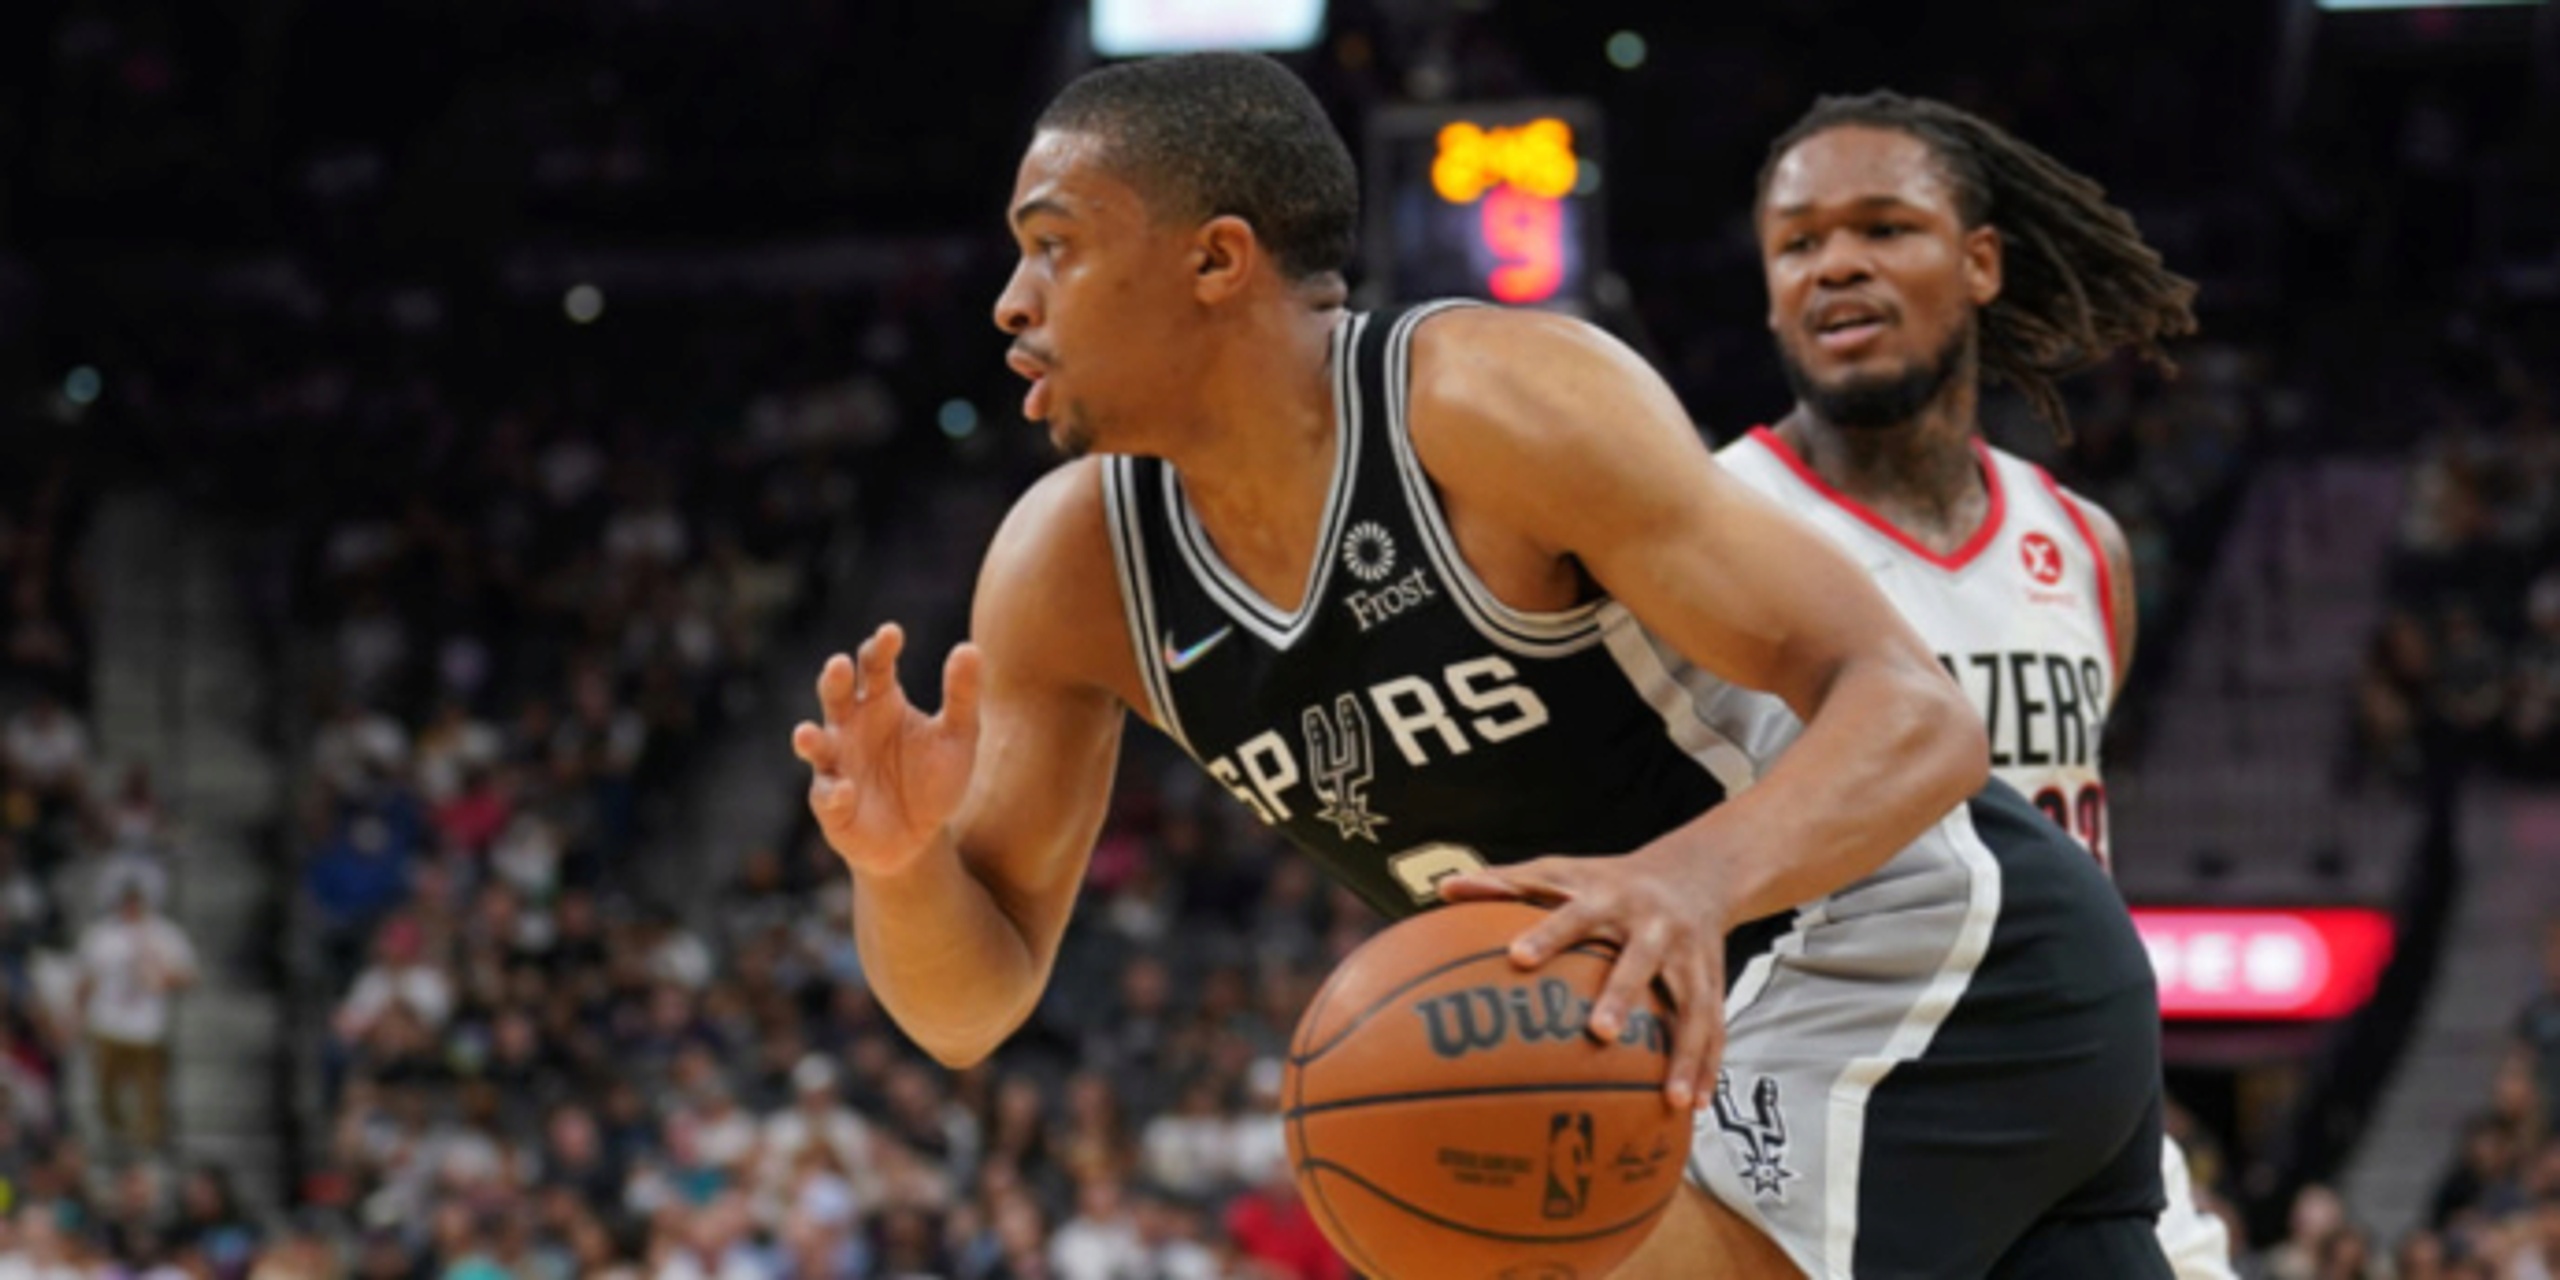 Spurs top short-handed Blazers to strengthen play-in hopes